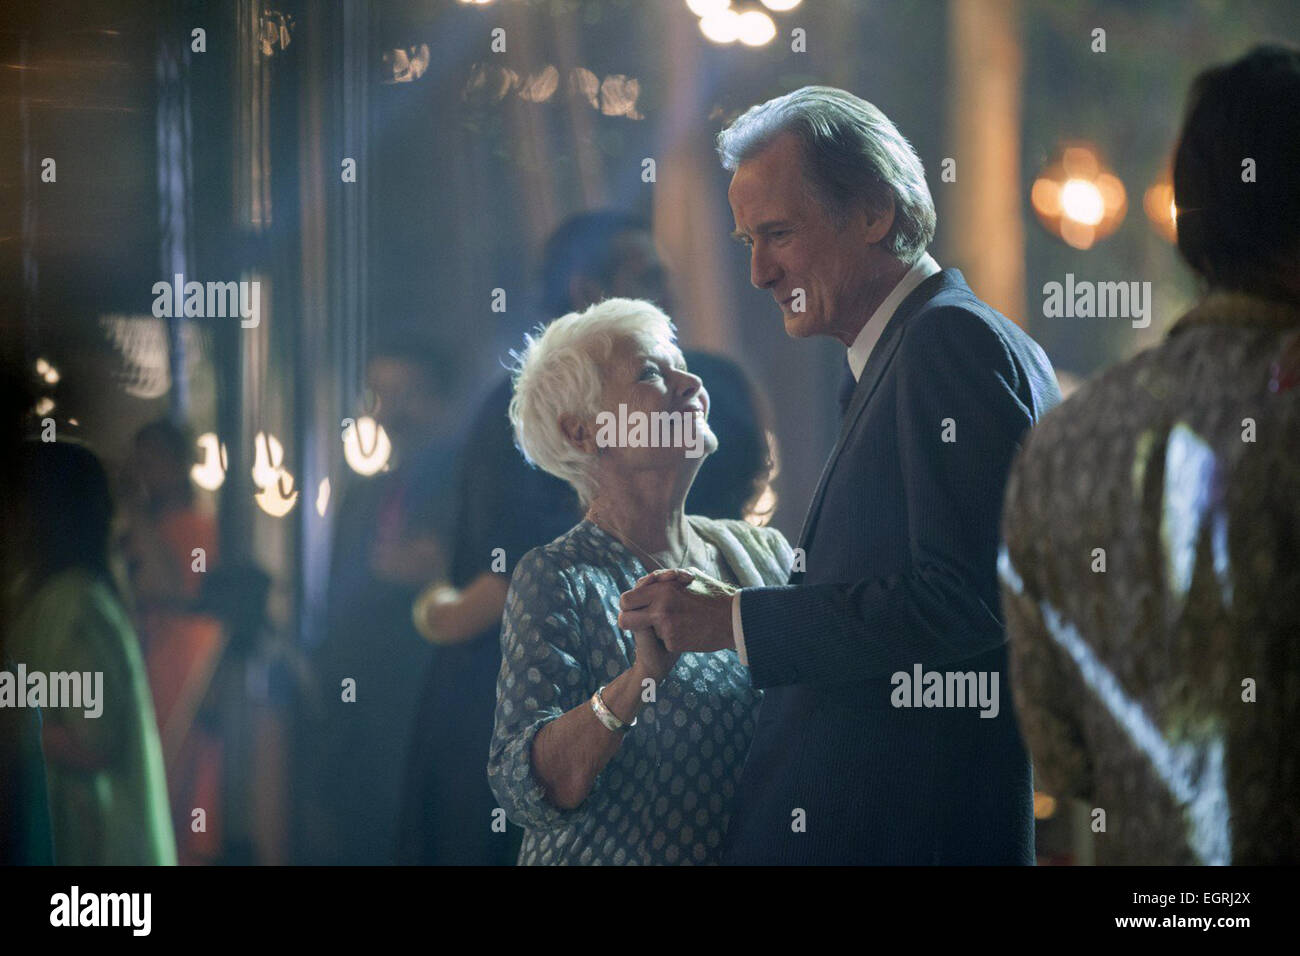 The Second Best Exotic Marigold Hotel is a 2015 British comedy-drama film directed by John Madden and written by Ol Parker. It is the sequel to the 2012 sleeper hit film The Best Exotic Marigold Hotel and features an ensemble cast featuring Judi Dench, Maggie Smith, Bill Nighy, Celia Imrie, Penelope Wilton, Ronald Pickup, Diana Hardcastle, Tamsin Greig, Tena Desae, Dev Patel, Lillete Dubey, David Strathairn and Richard Gere. Stock Photo